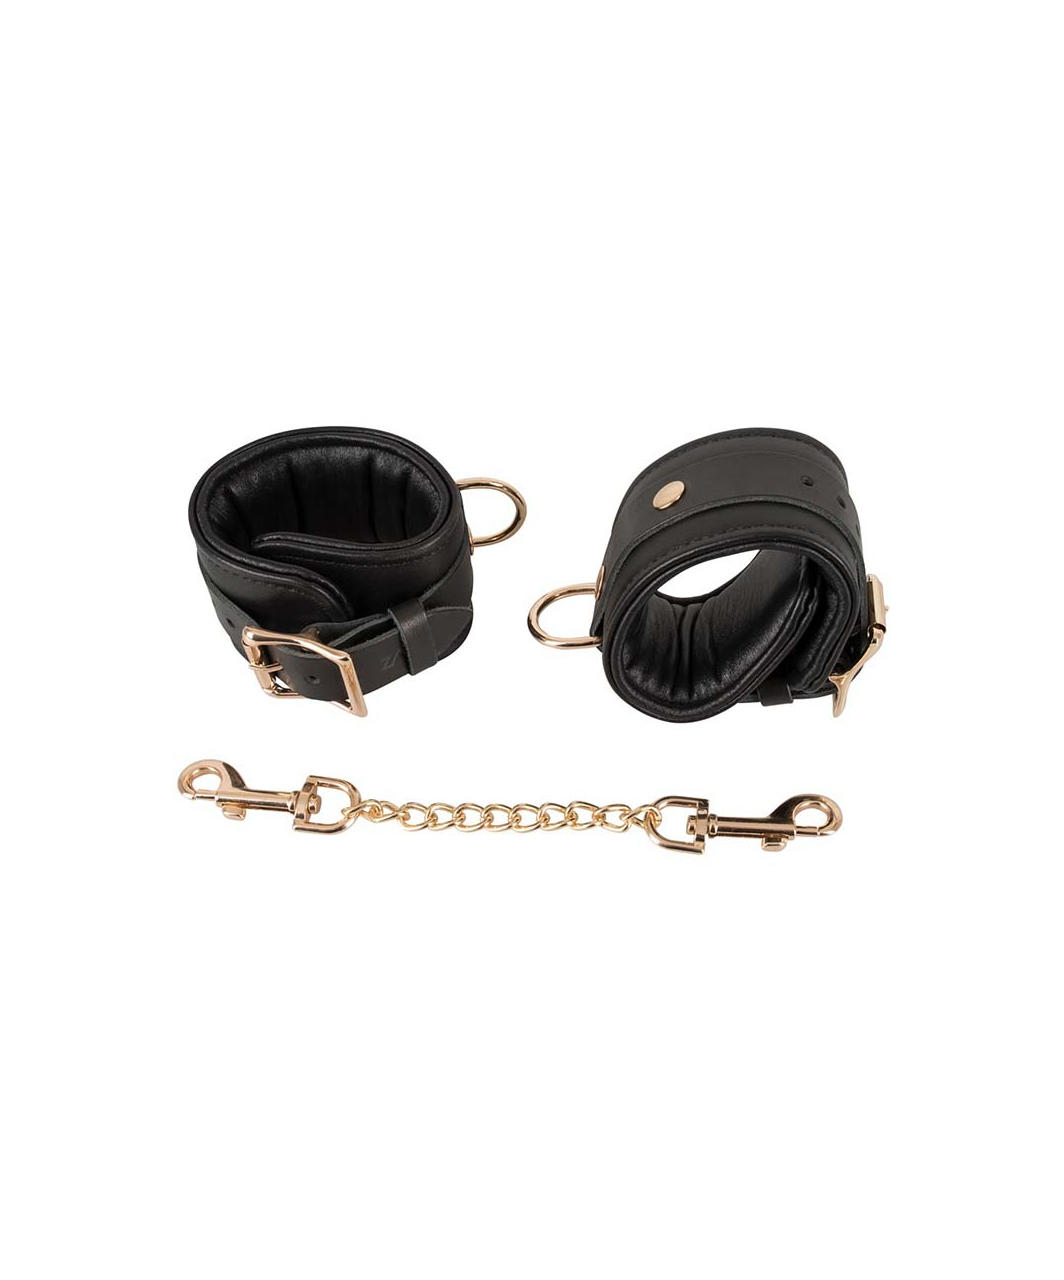 Zado Leather Handcuffs with Gold-coloured Chain